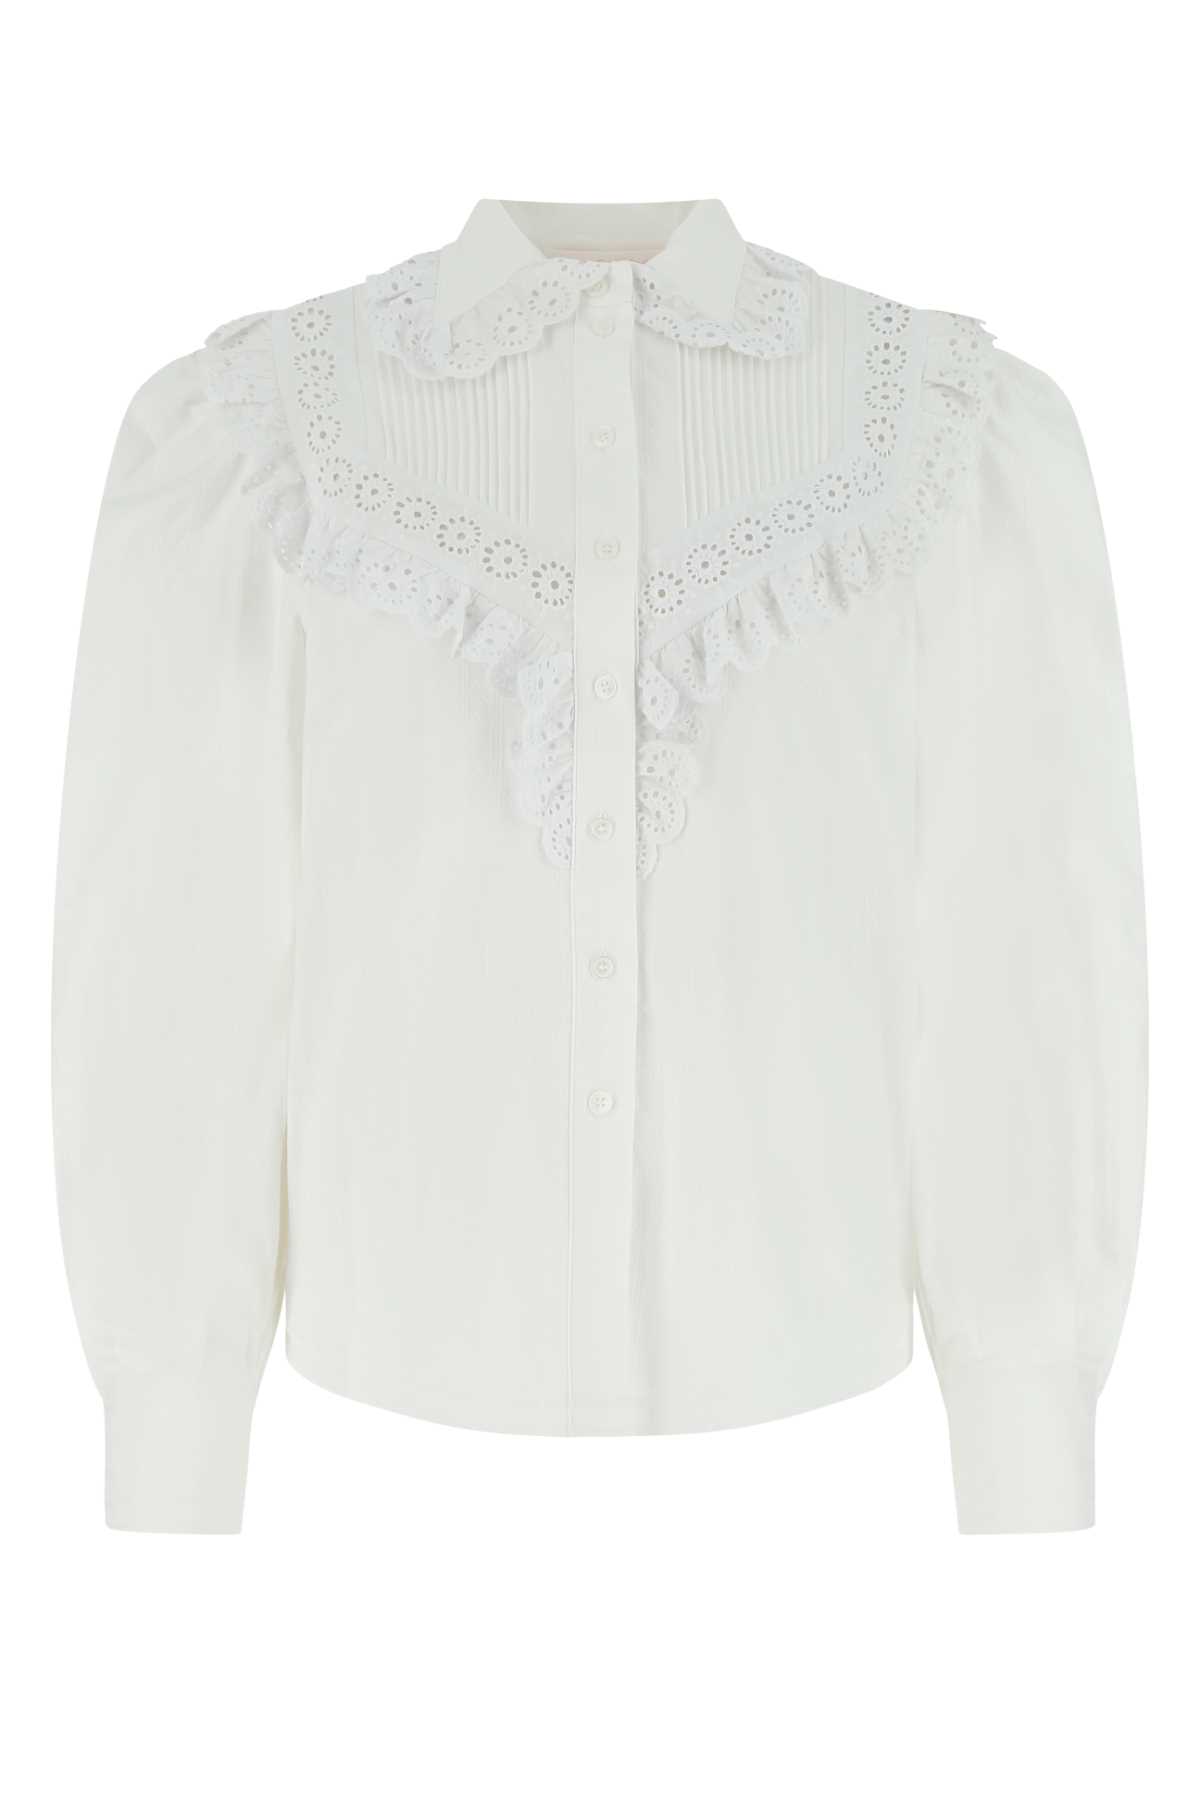 See by Chloé White Cotton Shirt